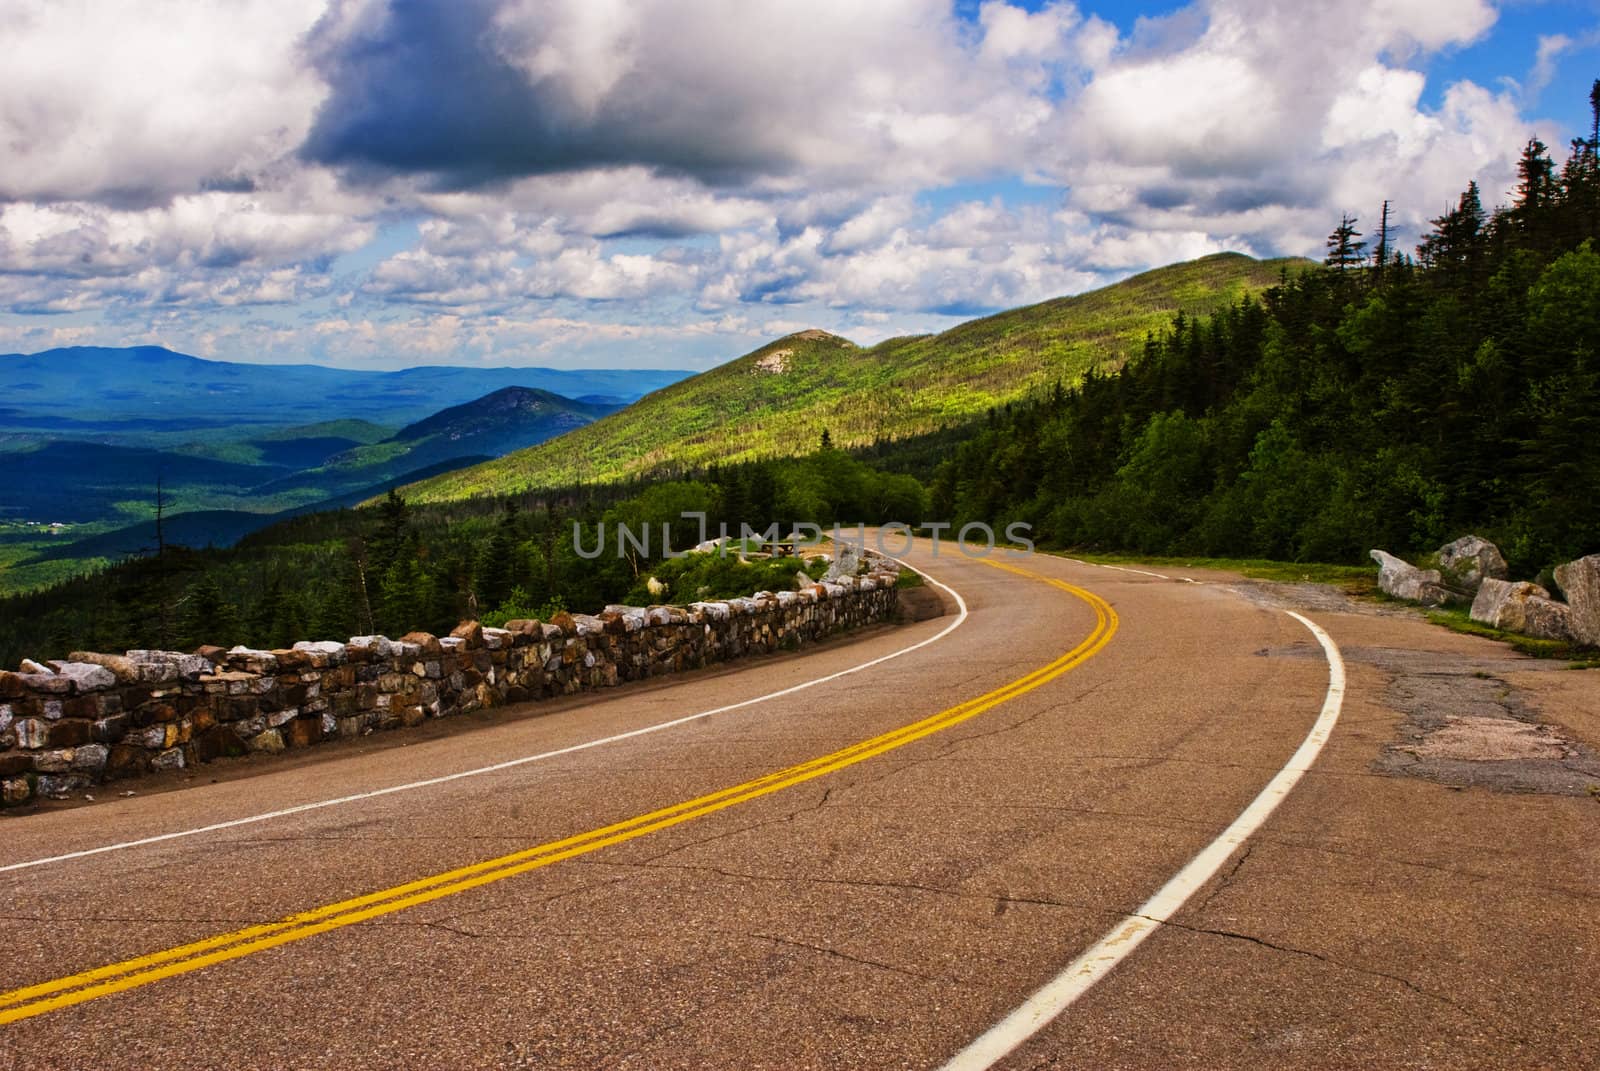 A road leading up to Whiteface Mountain in the Adirondack State Park.